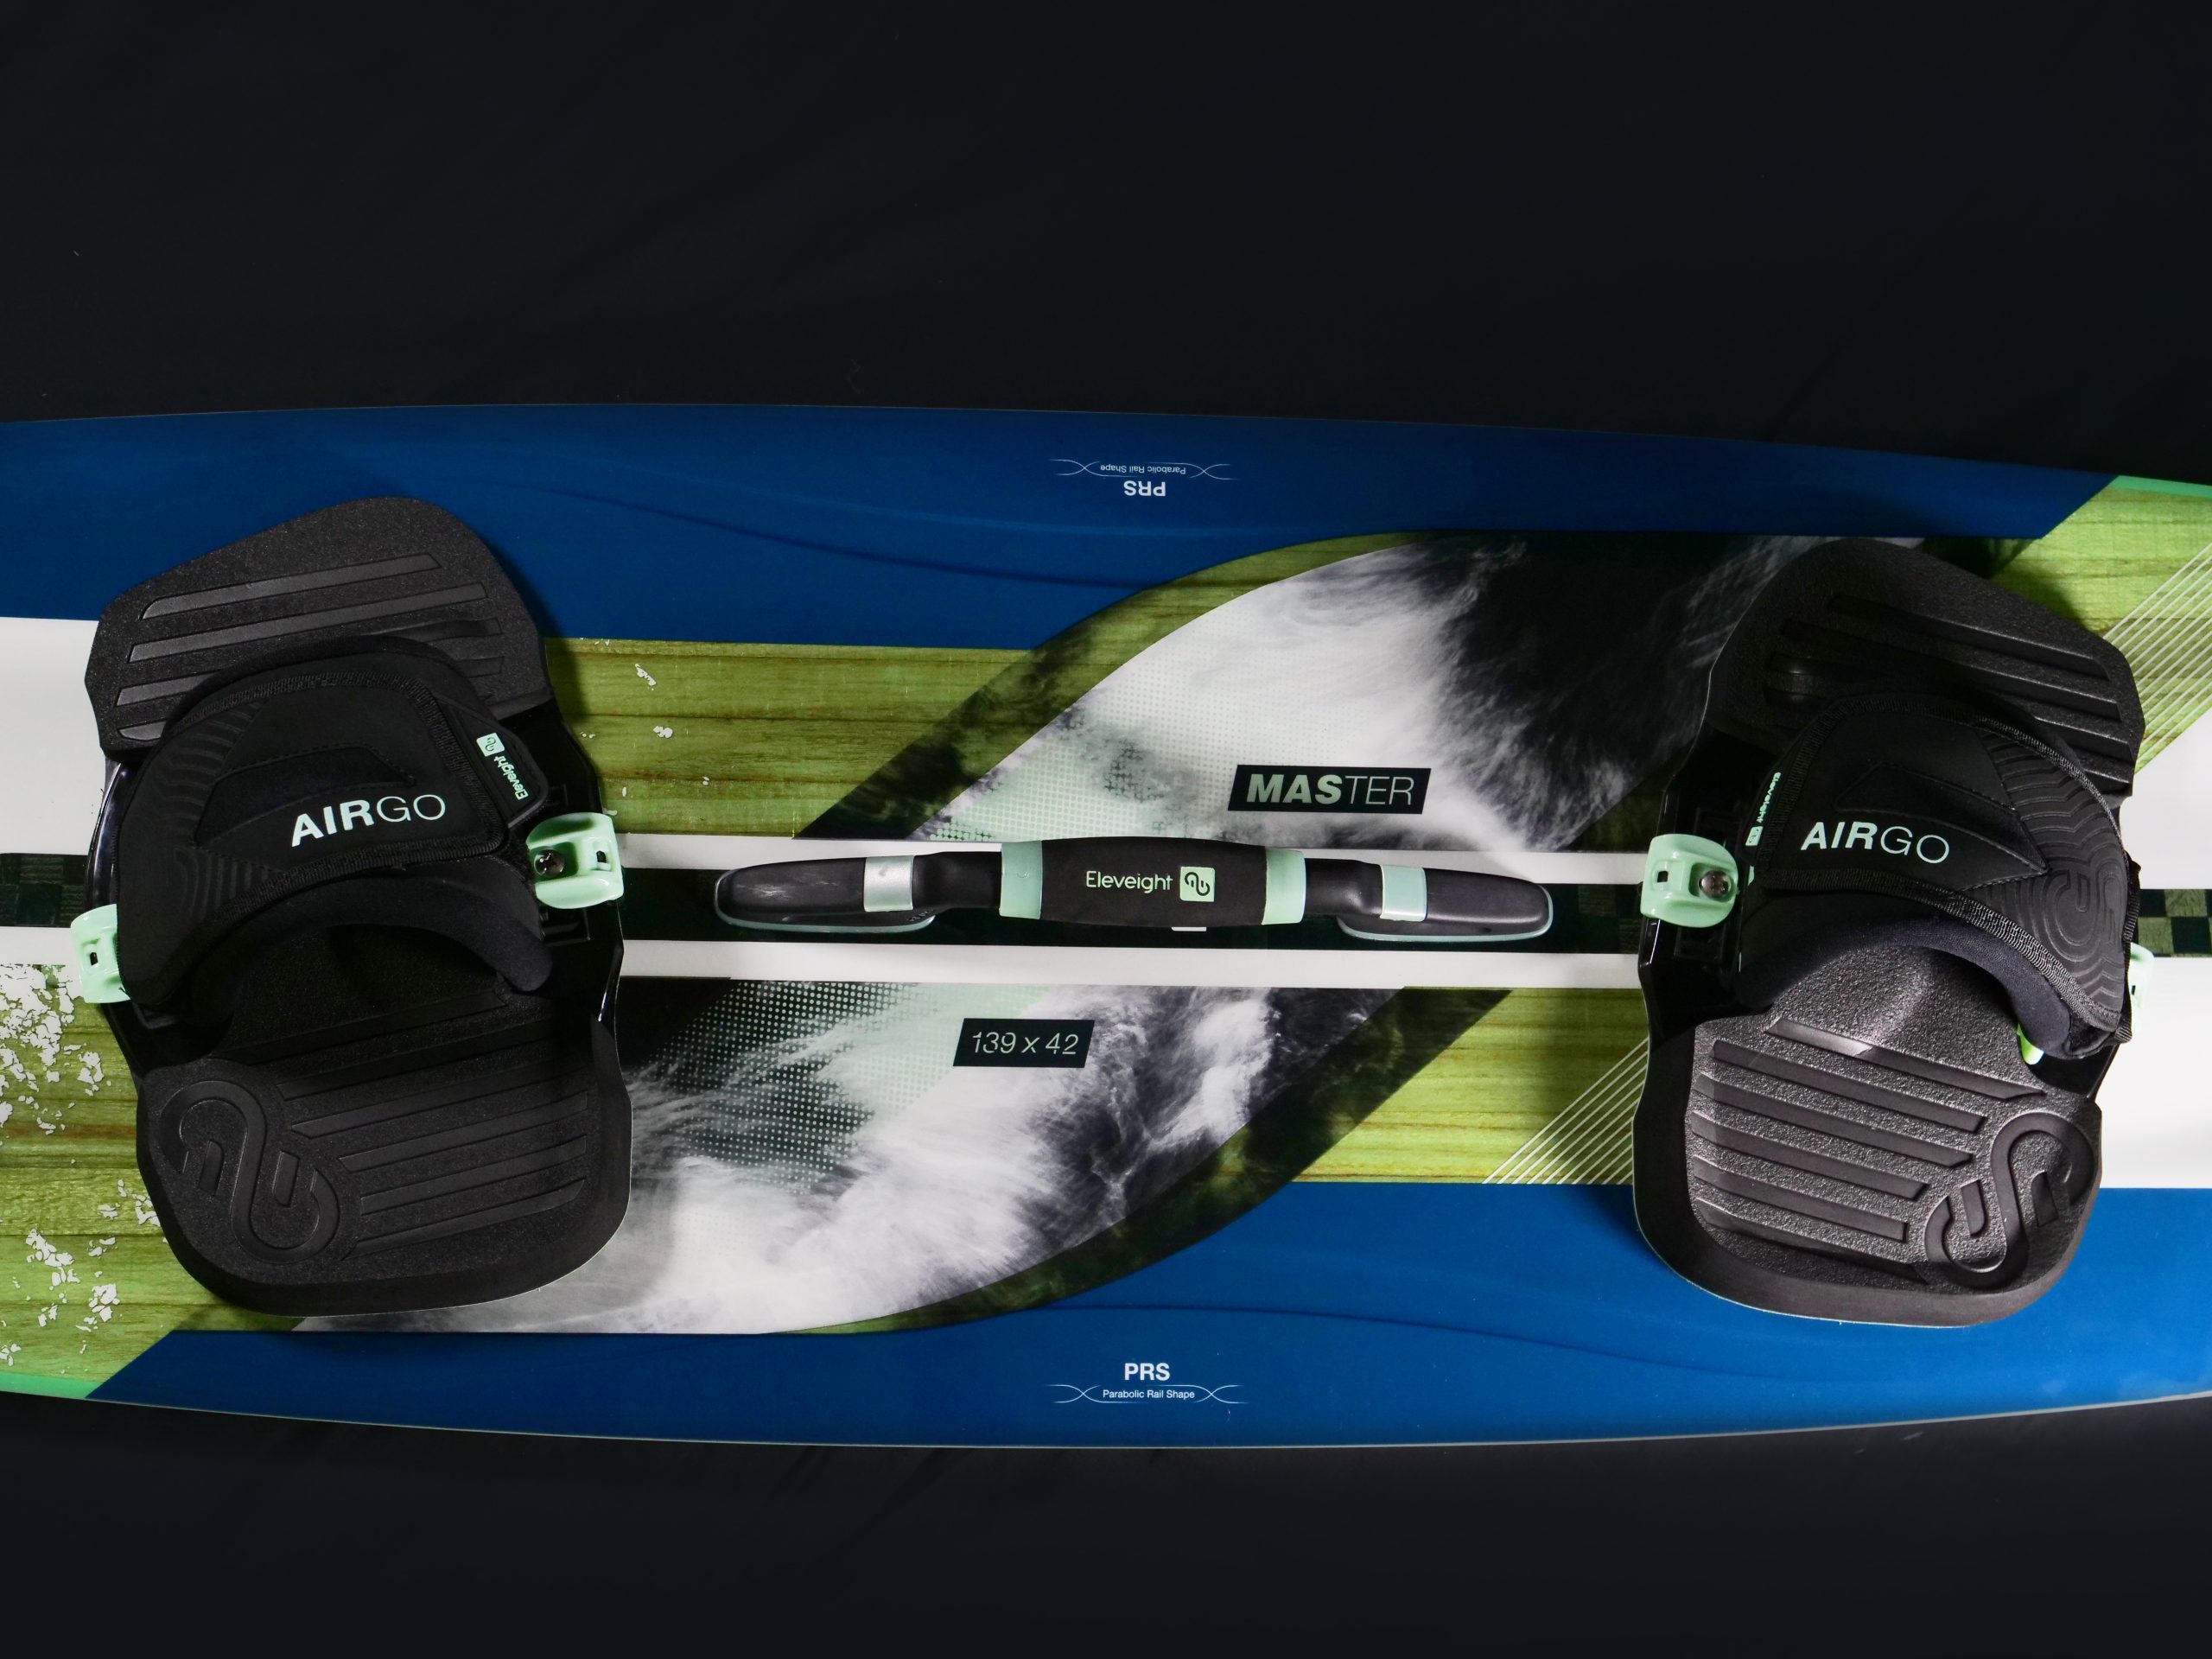 Eleveight S/S 22 Kiteboarding Preview